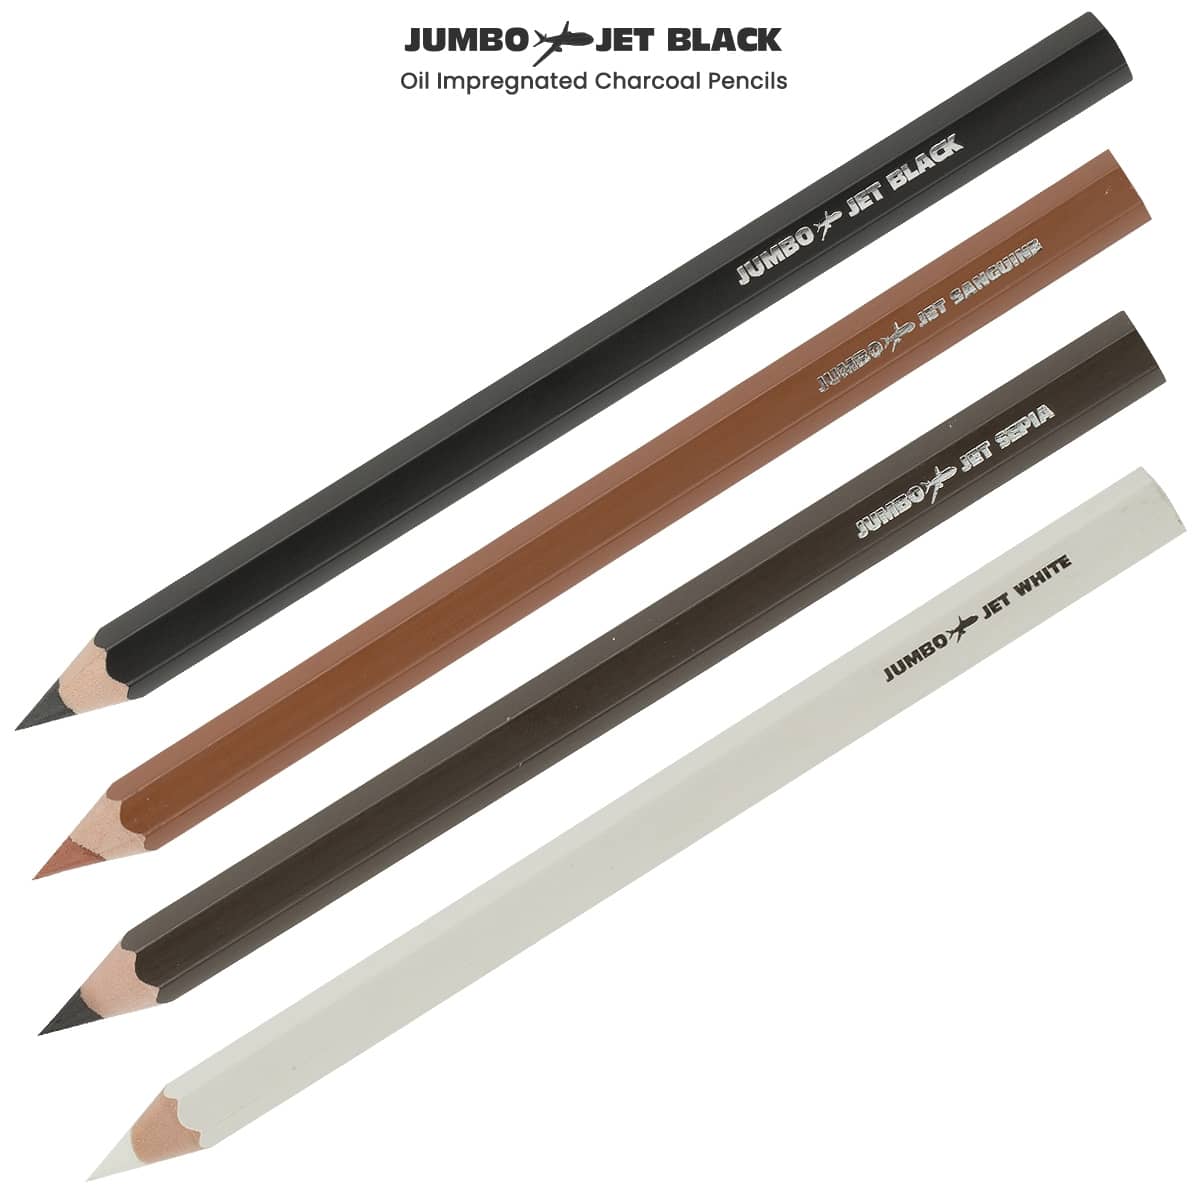 PANDAFLY Professional Charcoal Pencils Drawing Set - 8 Pieces Super Soft, Soft, Medium and Hard Charcoal Pencils for Drawing, Sketching, Shading, Arti